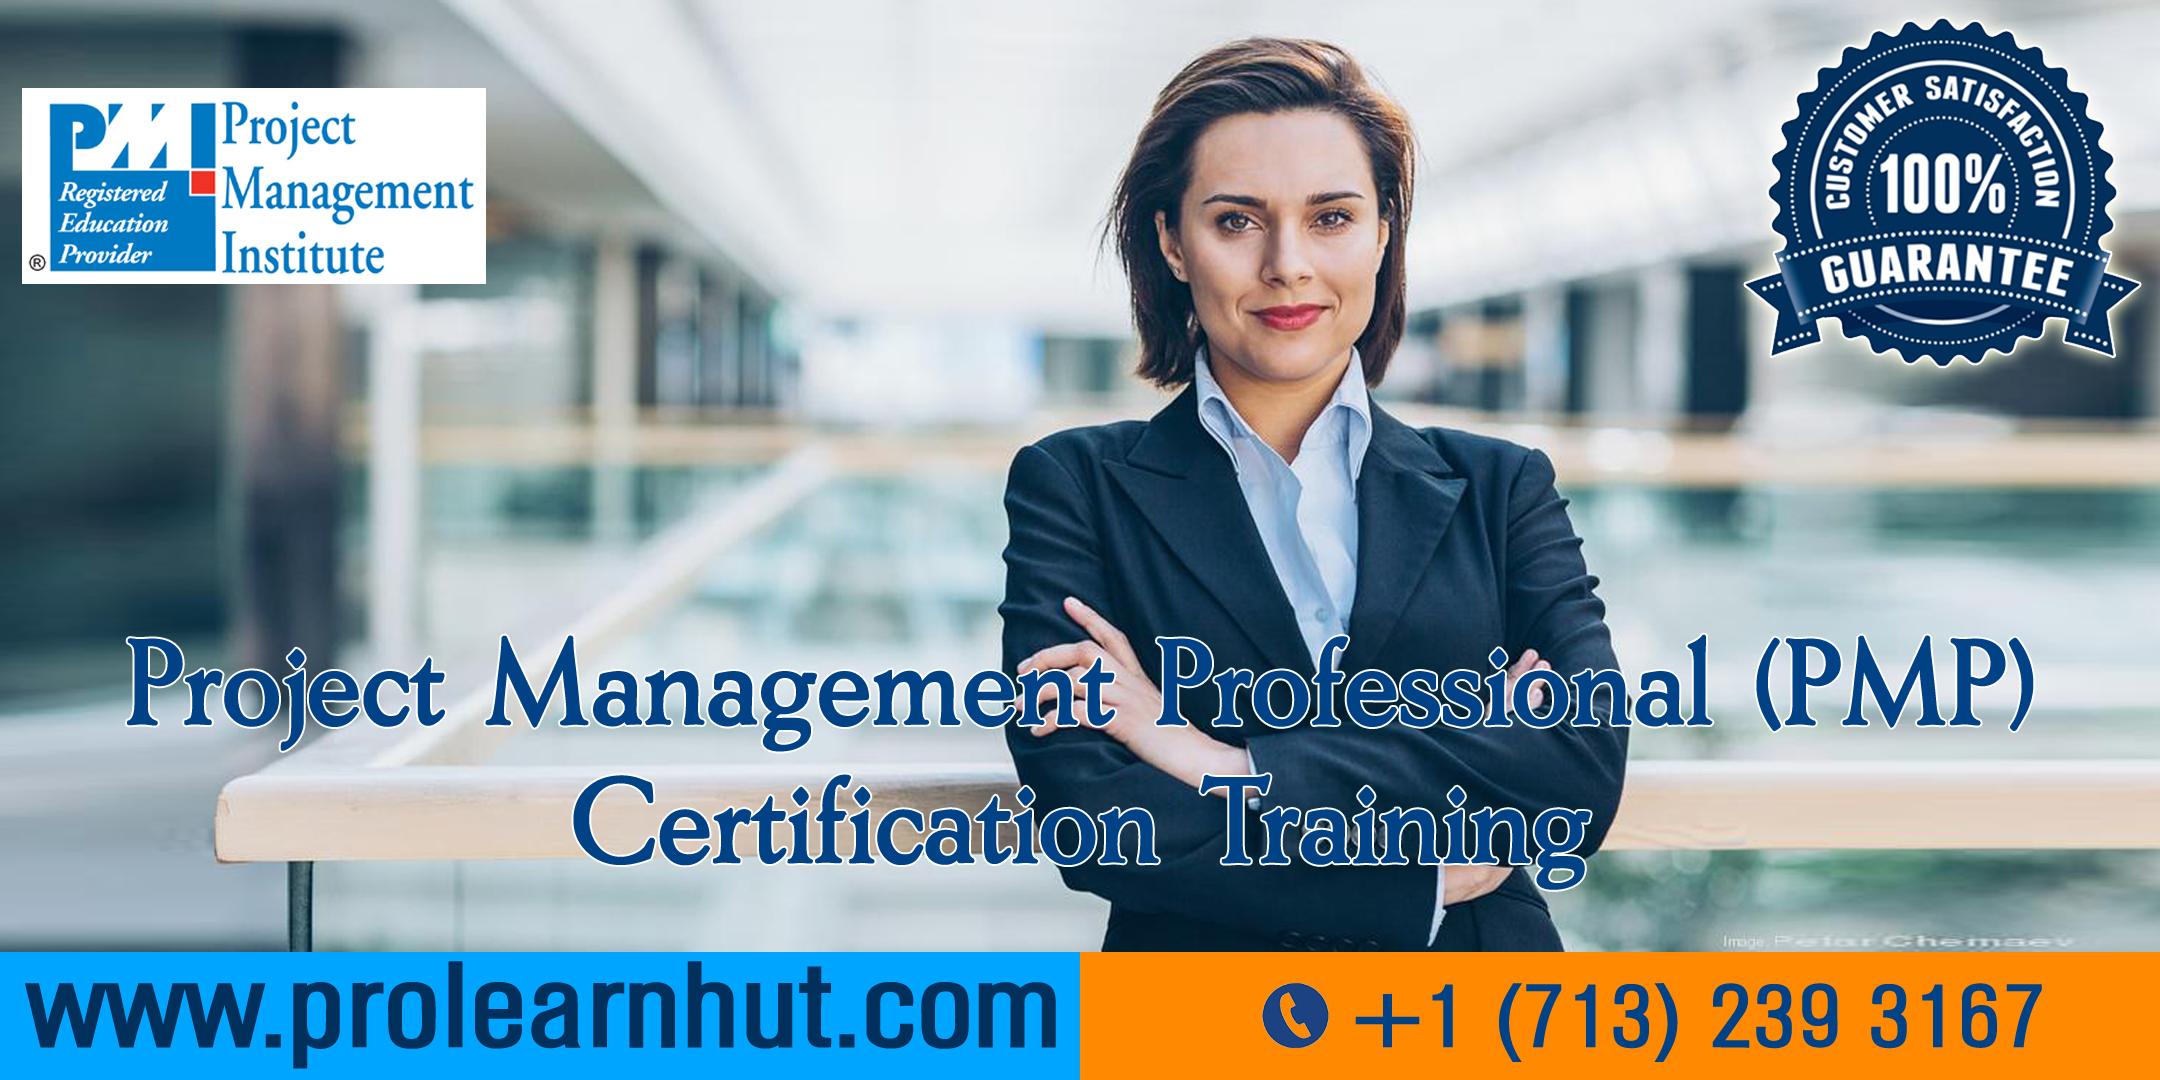 PMP Certification | Project Management Certification| PMP Training in Waterbury, CT | ProLearnHut